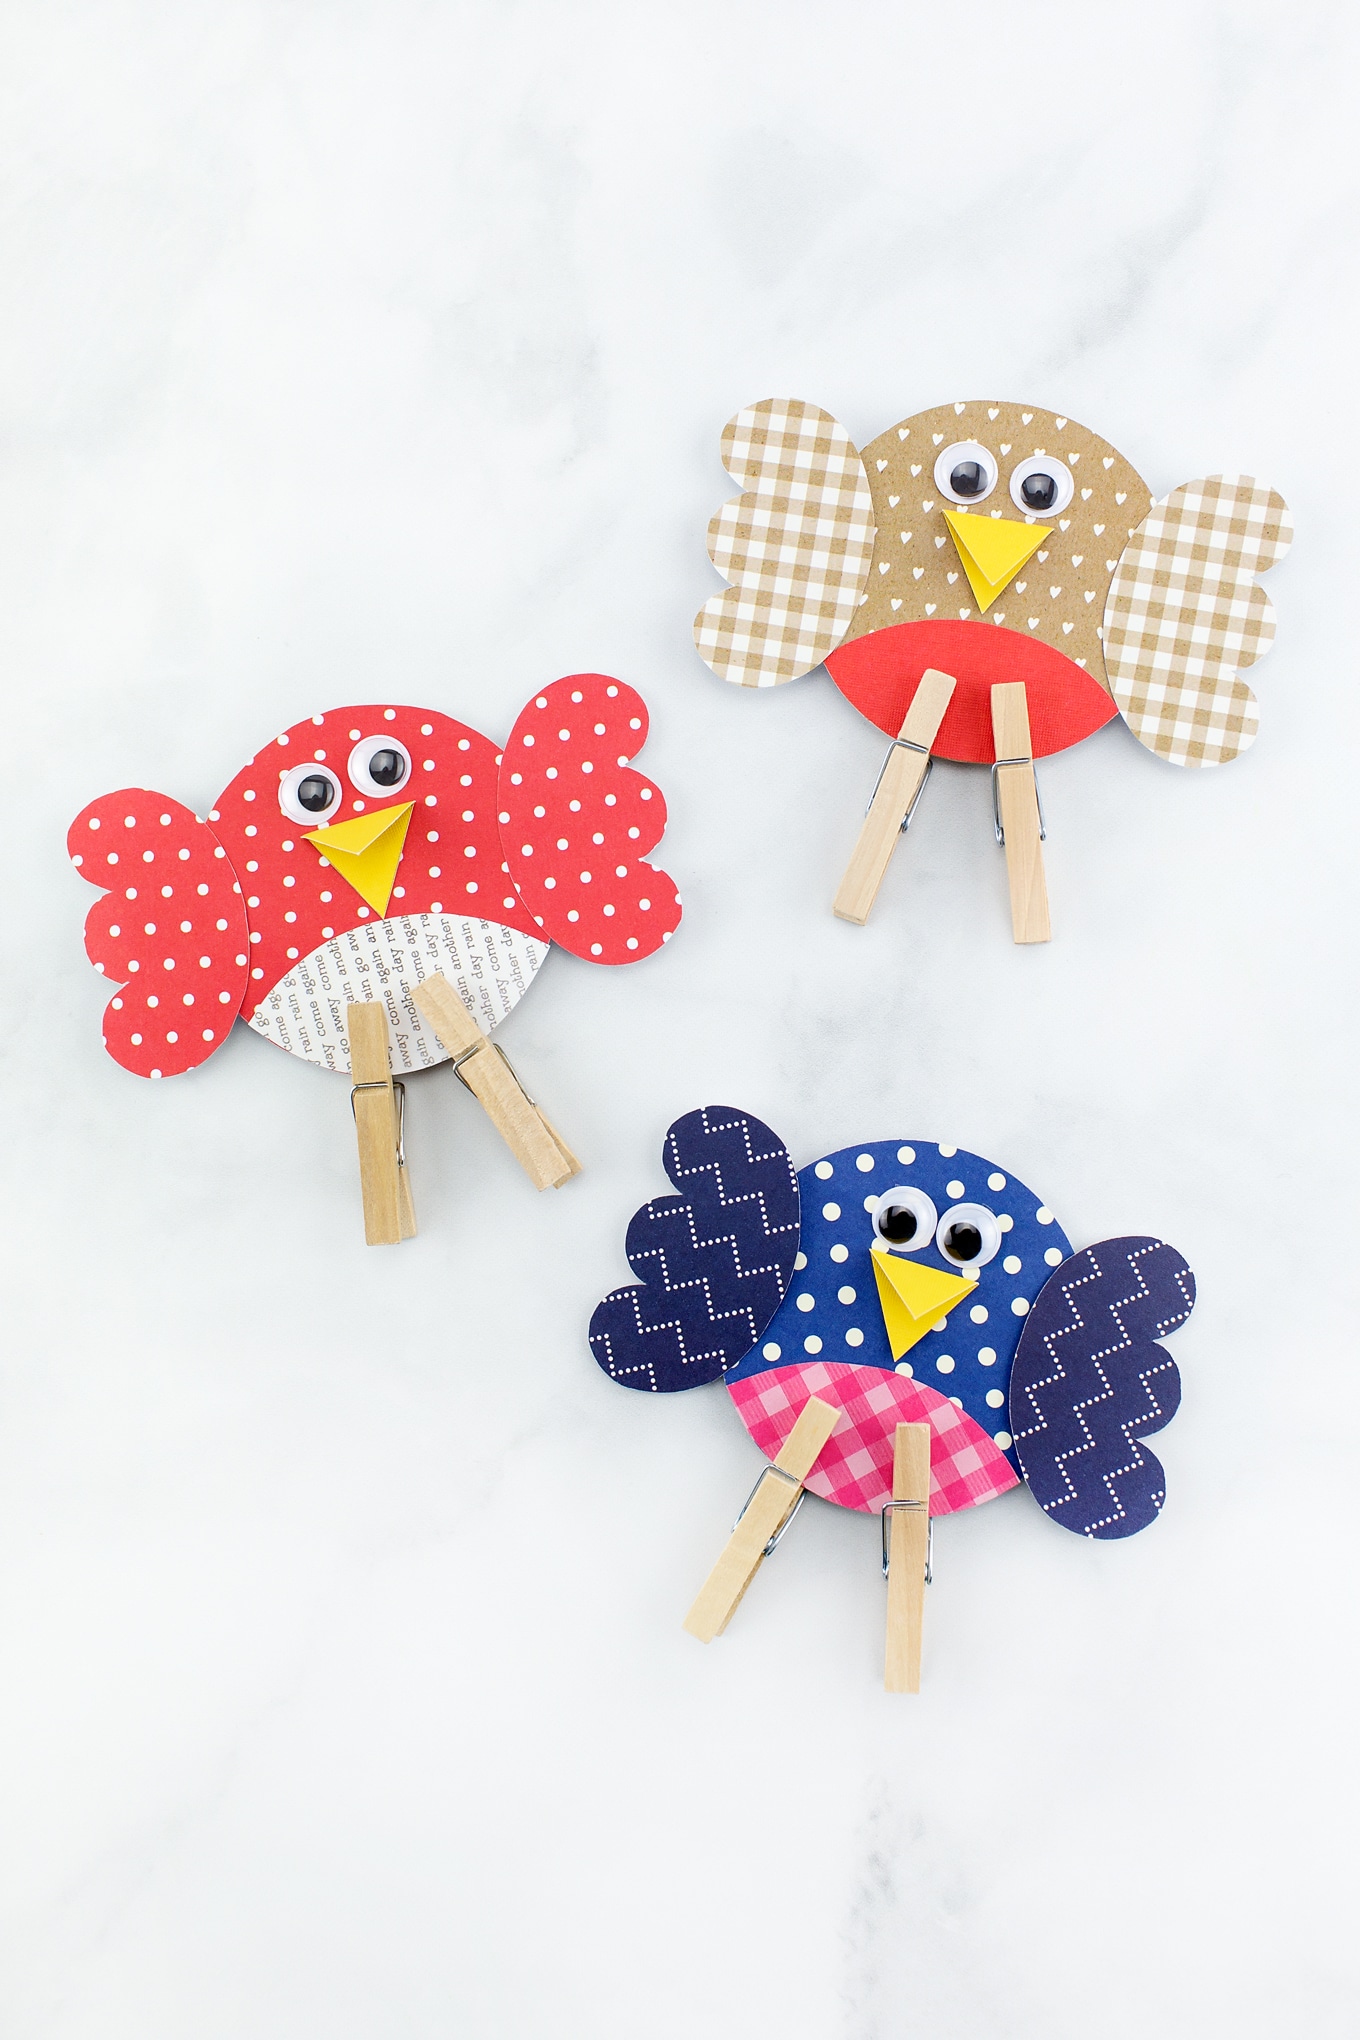 How to Make an Easy and Fun Paper Bird Craft